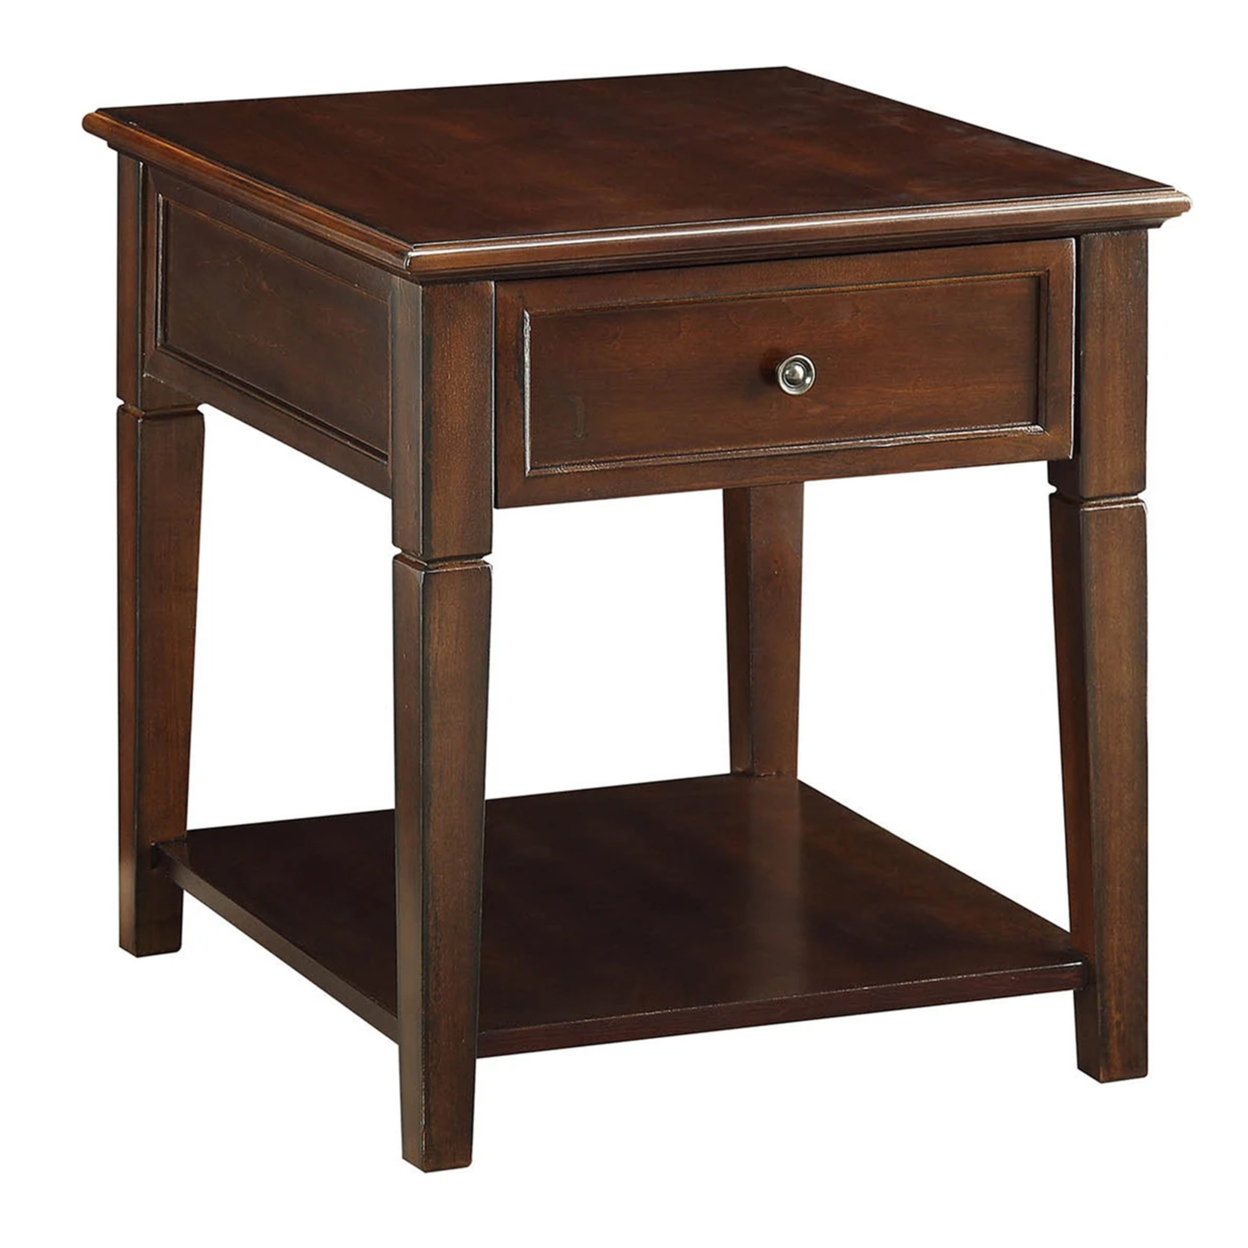 Wooden End Table With One Drawer And One Shelf, Walnut Brown- Saltoro Sherpi